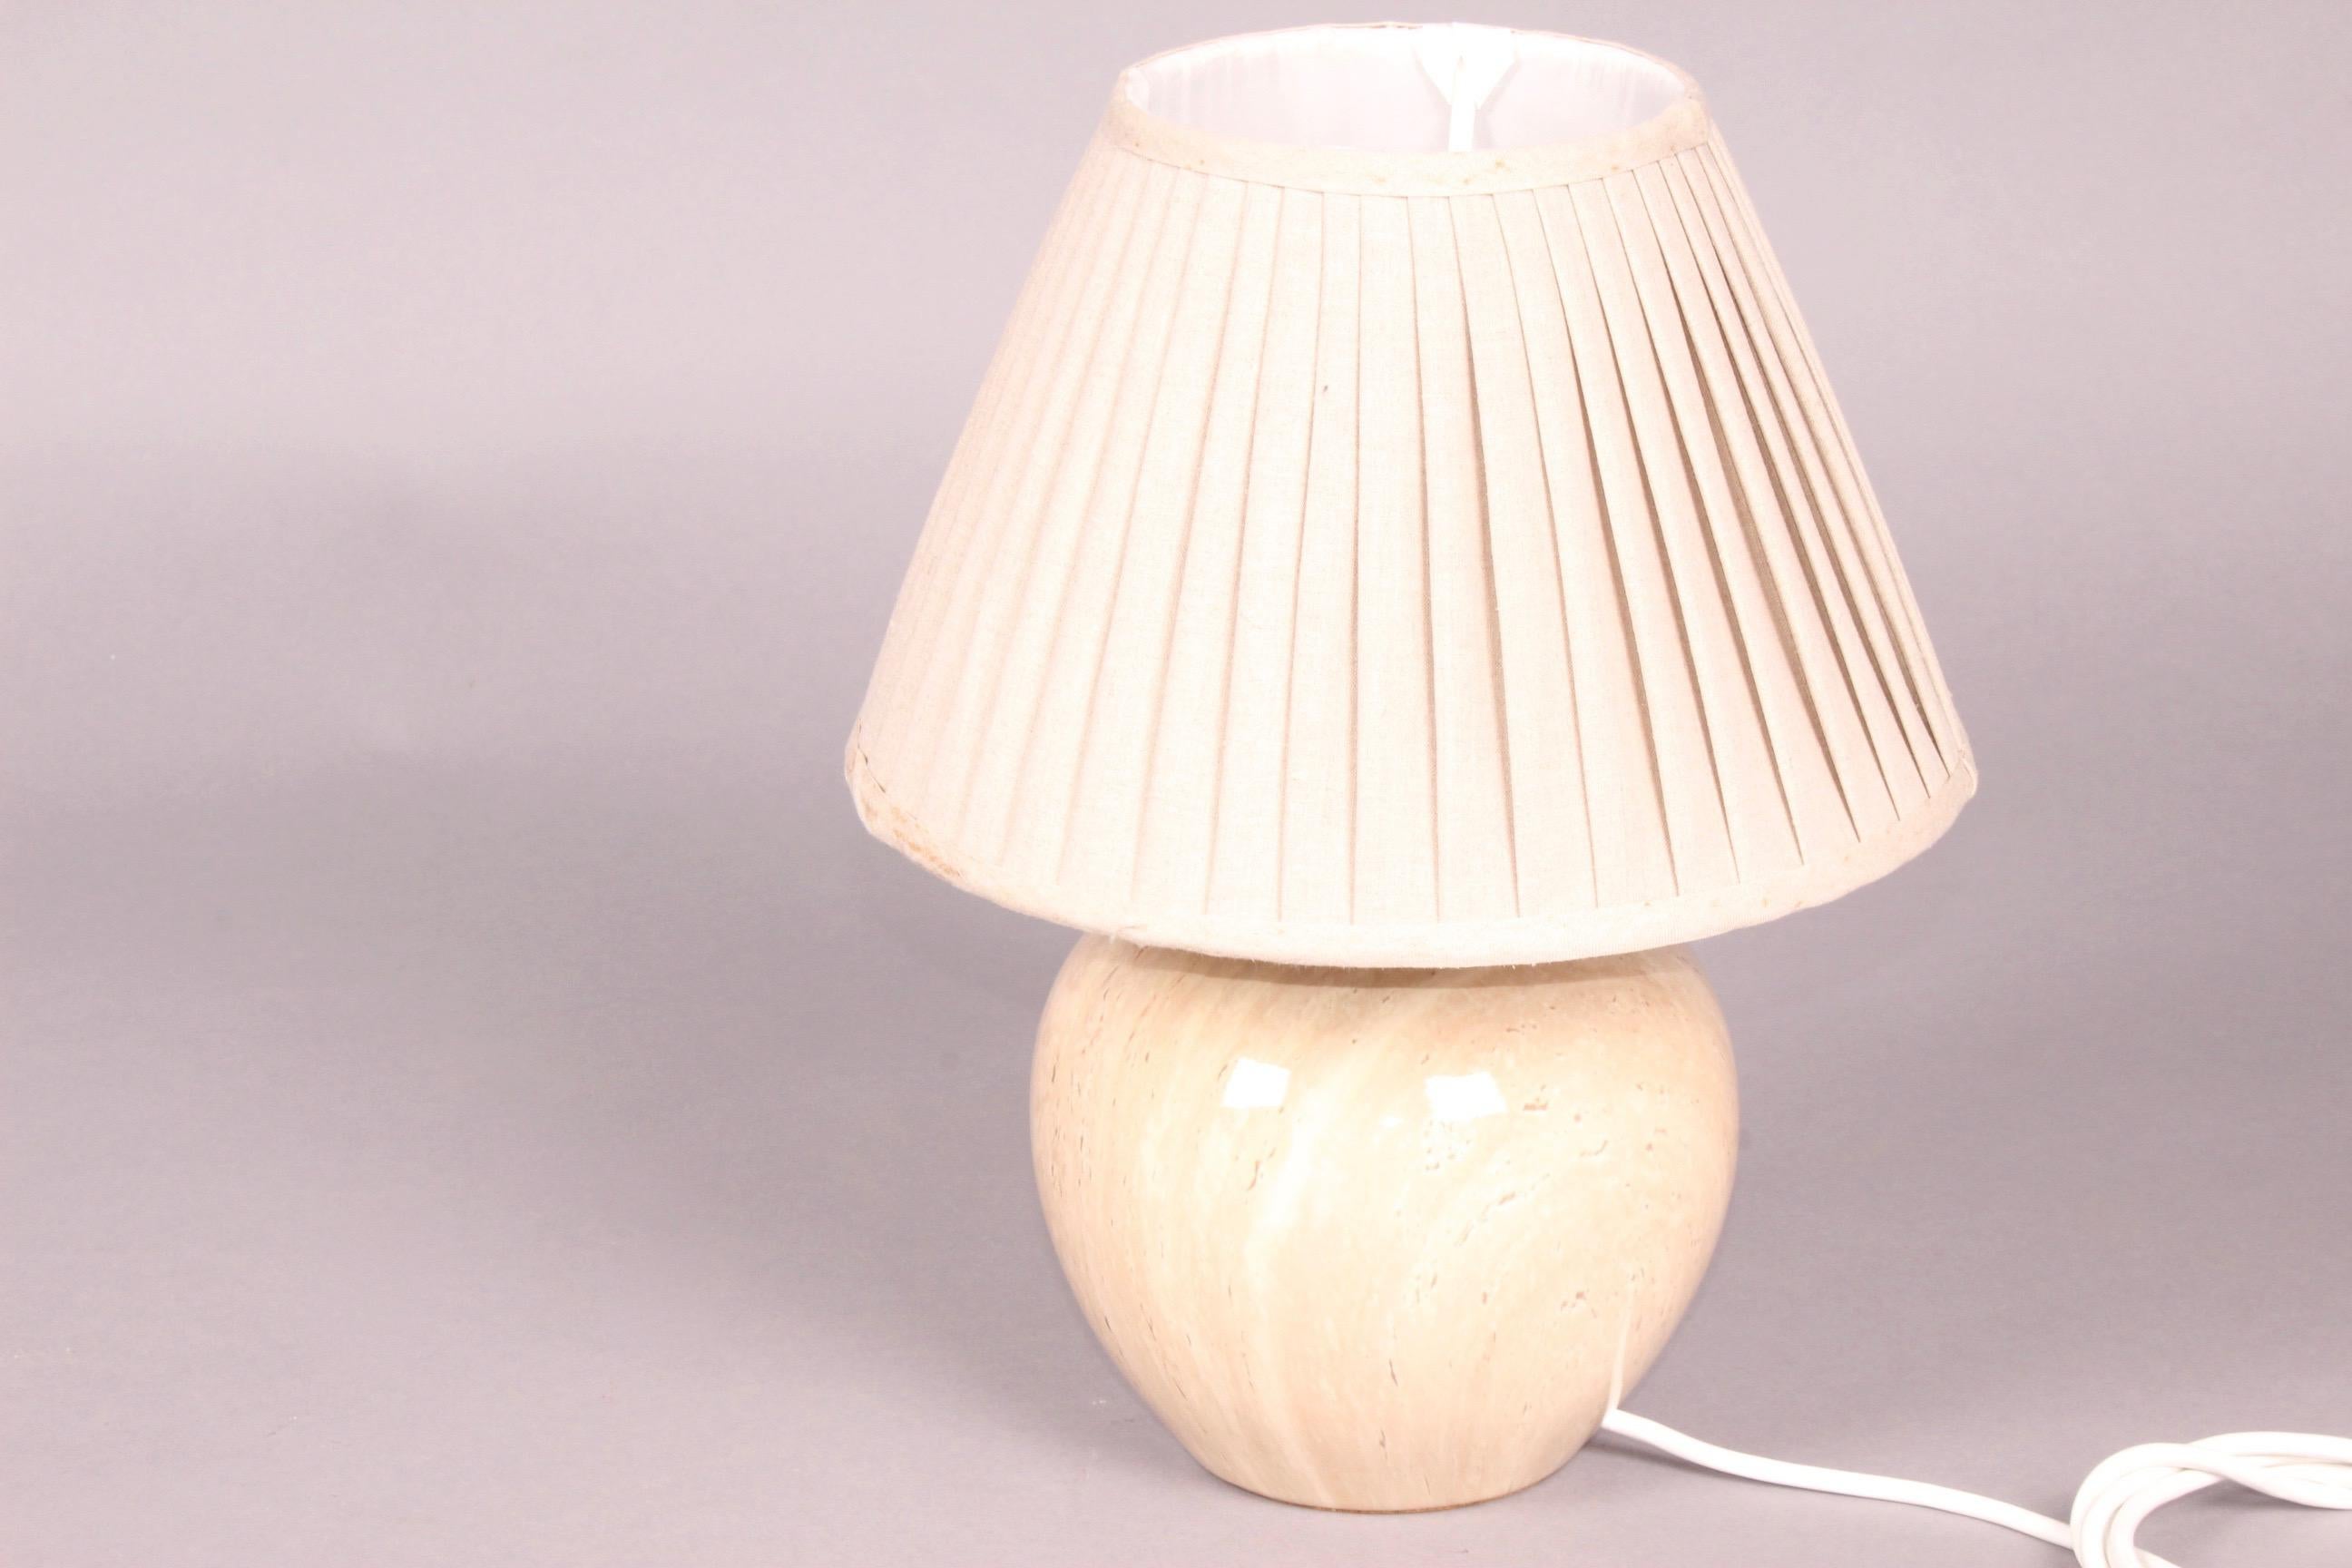 Pair of ceramic table lamp dimensions without shade. Measures: H 28, D 20 cm.